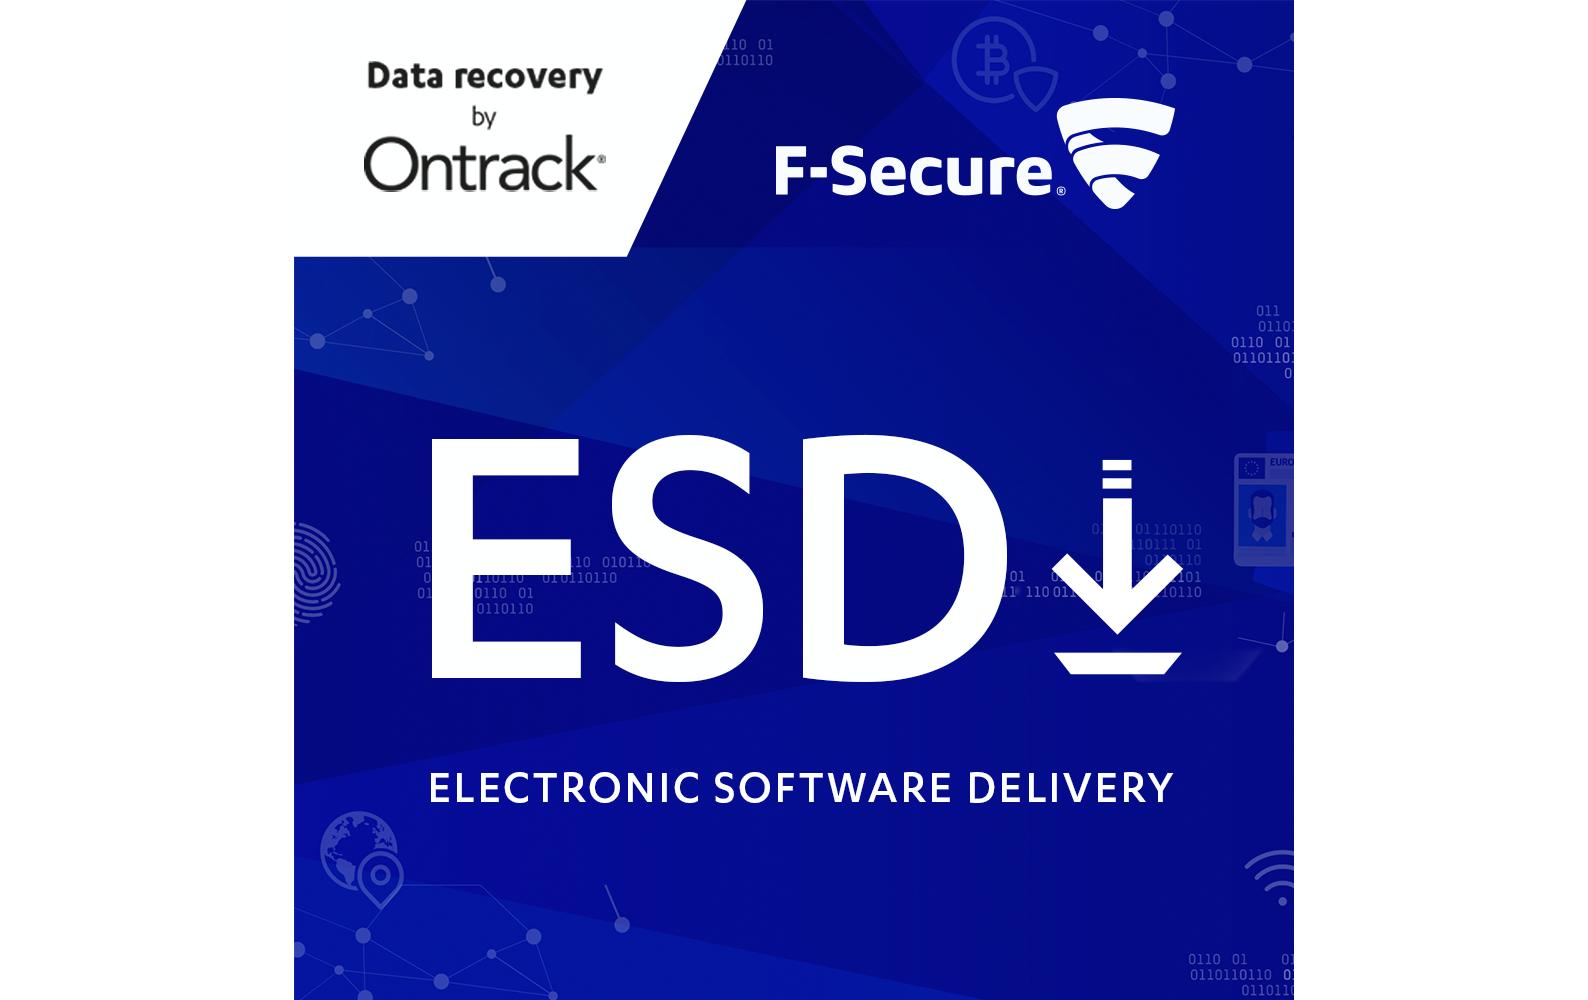 F-Secure SAFE + Ontrack Data Recovery Vollversion, 1 User, 1 Jahr